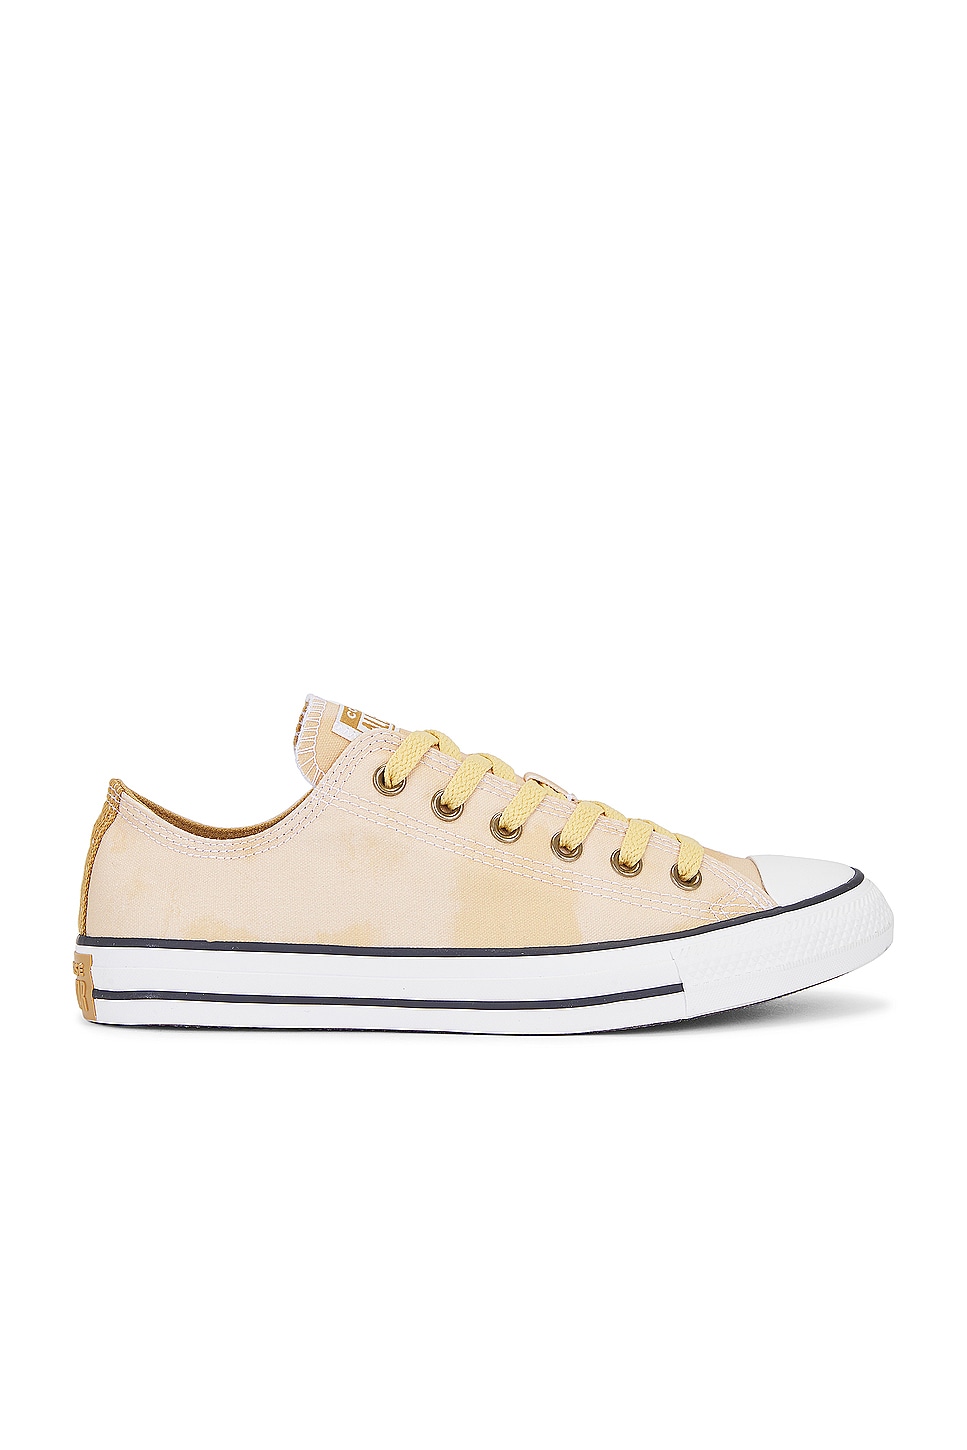 Image 1 of Converse Chuck Taylor All Star in Utility Sunflower, Trek Tan, & Vintage White